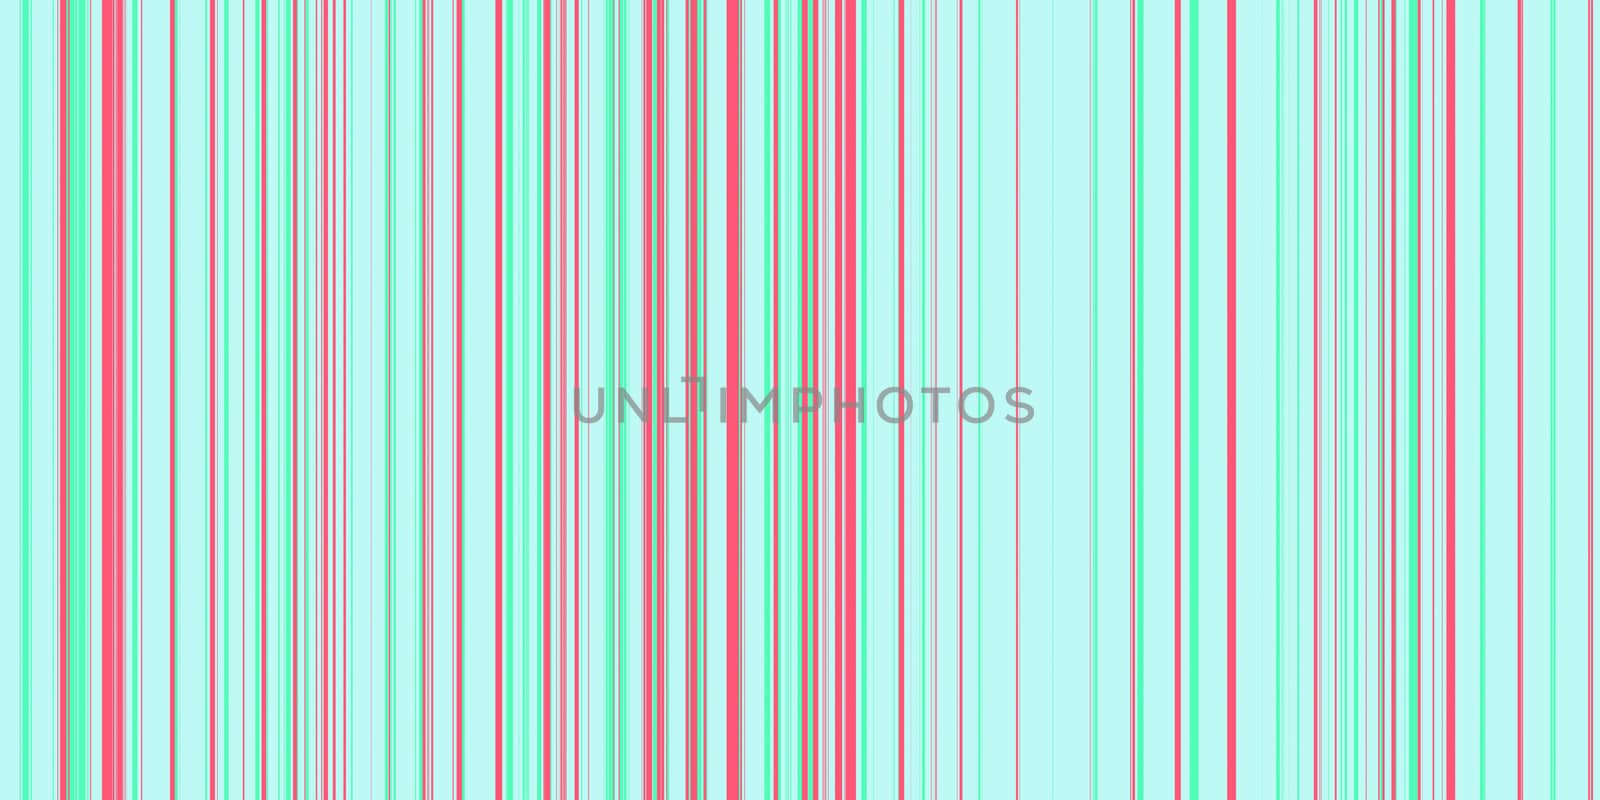 Light Candy Lines Background. Random Striped Lines Backdrop. Colorful Stripes Texture.